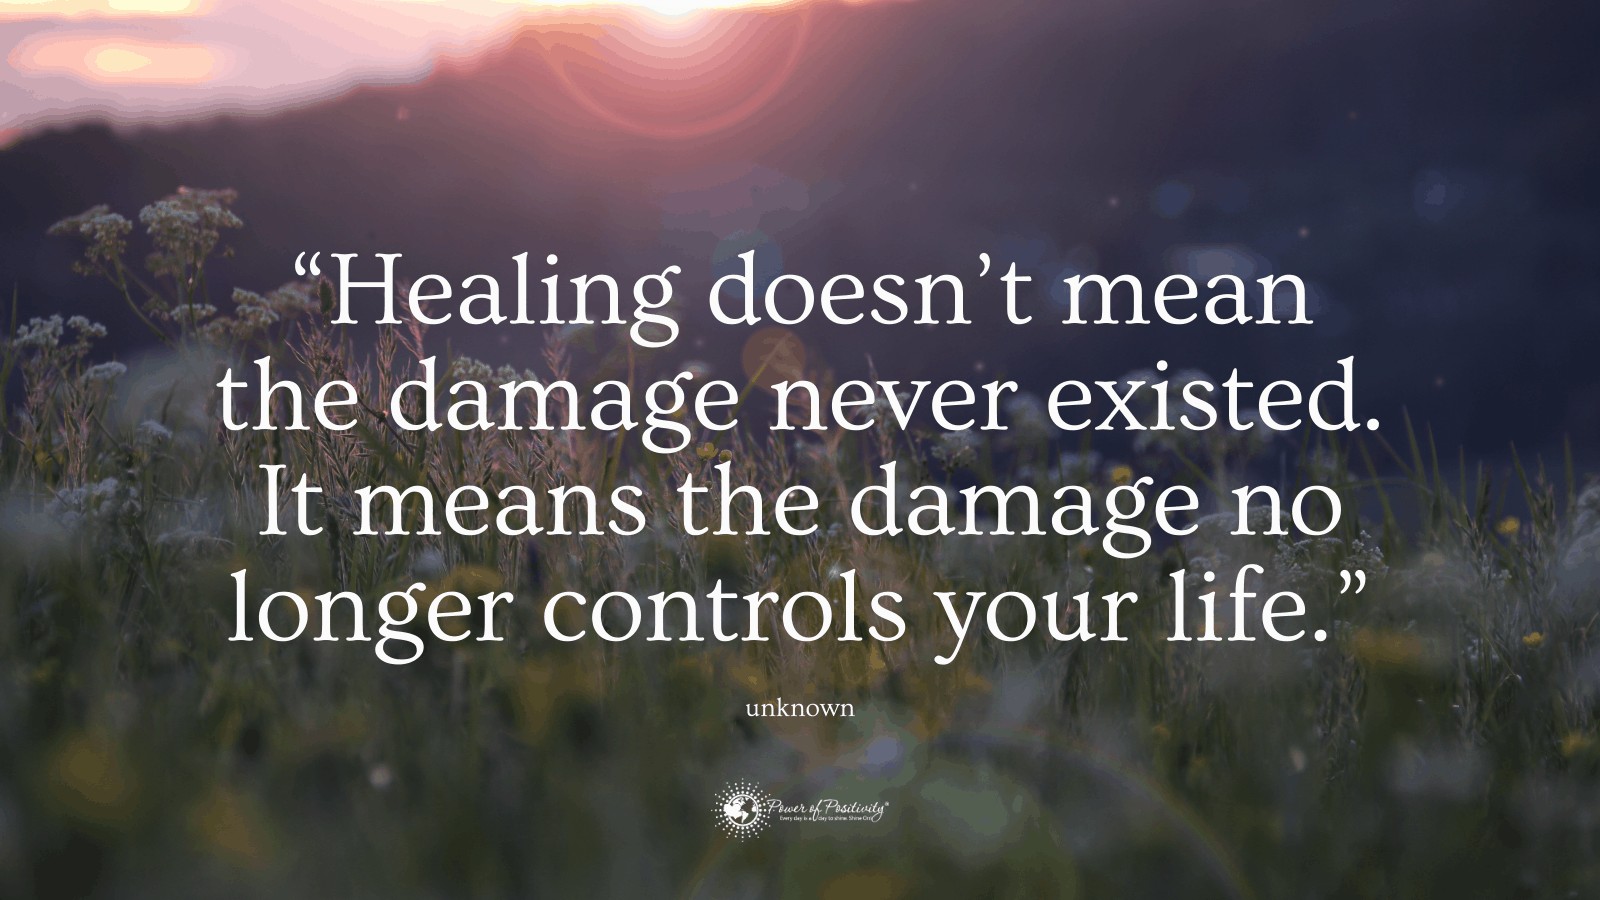 emotional pain and healing quote